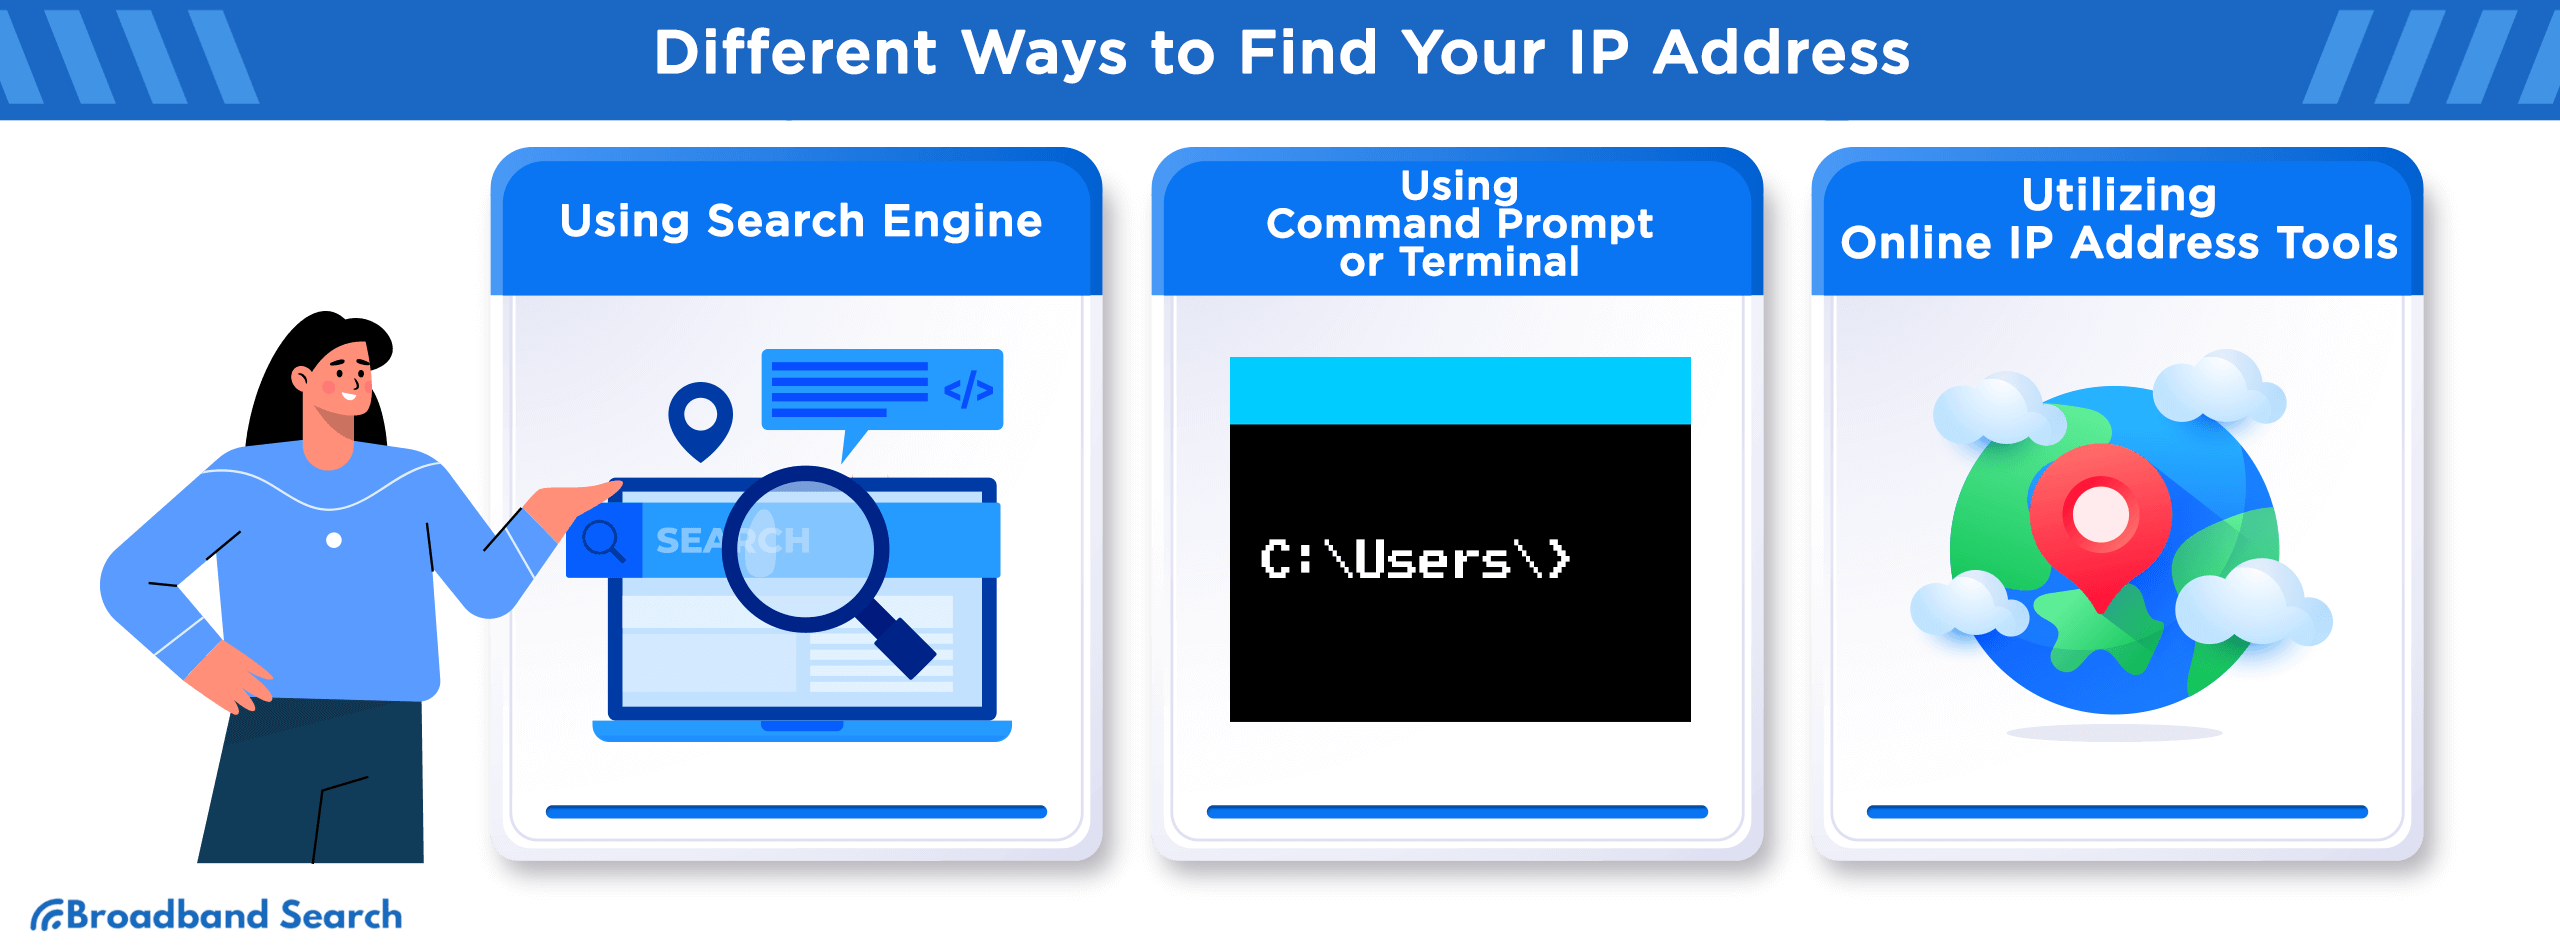 Different ways to find your ip address